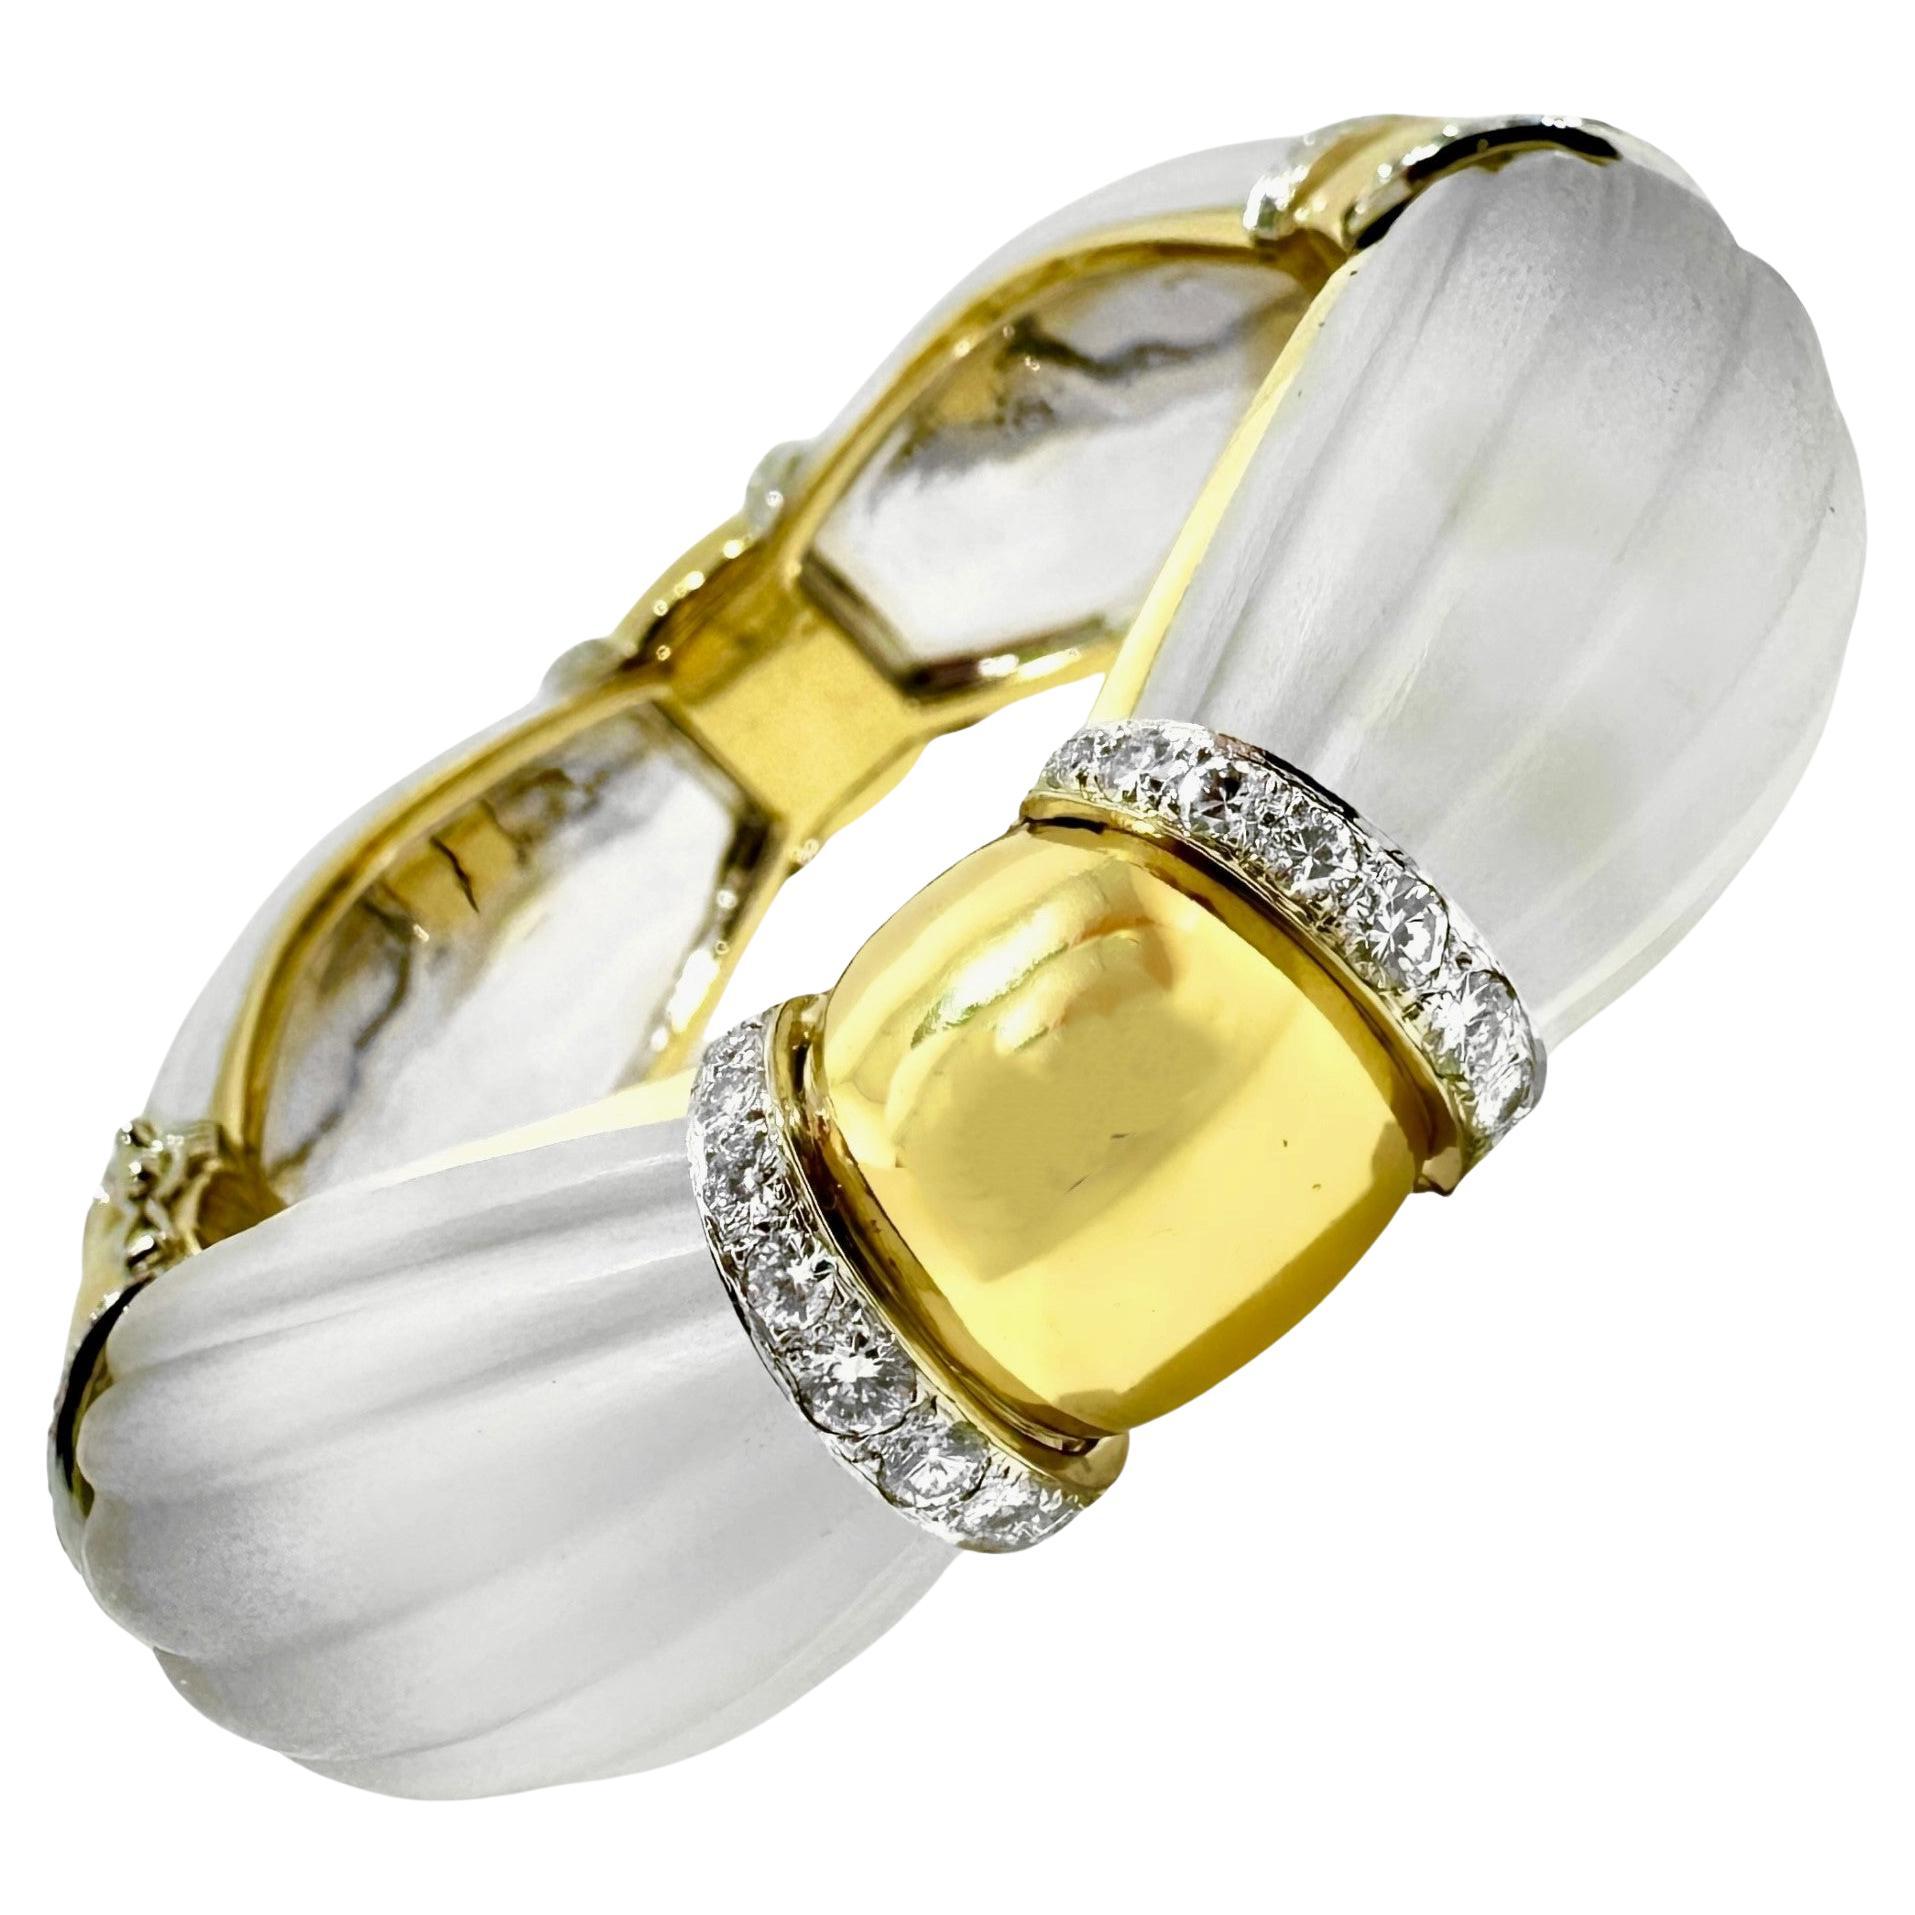 Tailored Mid-20th Century 18k Gold Bangle with Frosted Rock Crystal and Diamonds For Sale